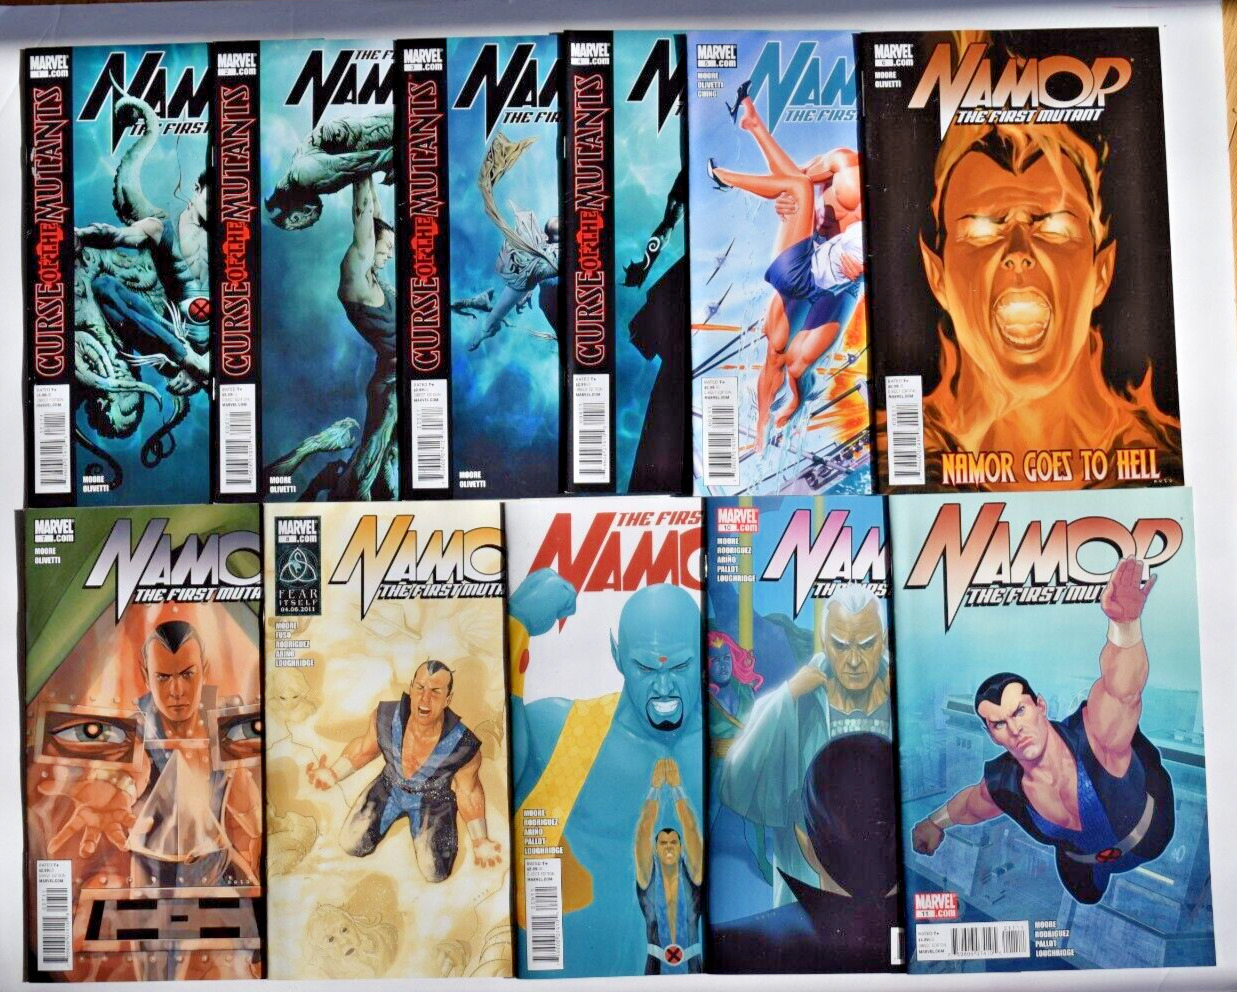 NAMOR THE FIRST MUTANT (2010) 11 ISSUE COMPLETE SET #1-11 MARVEL COMICS